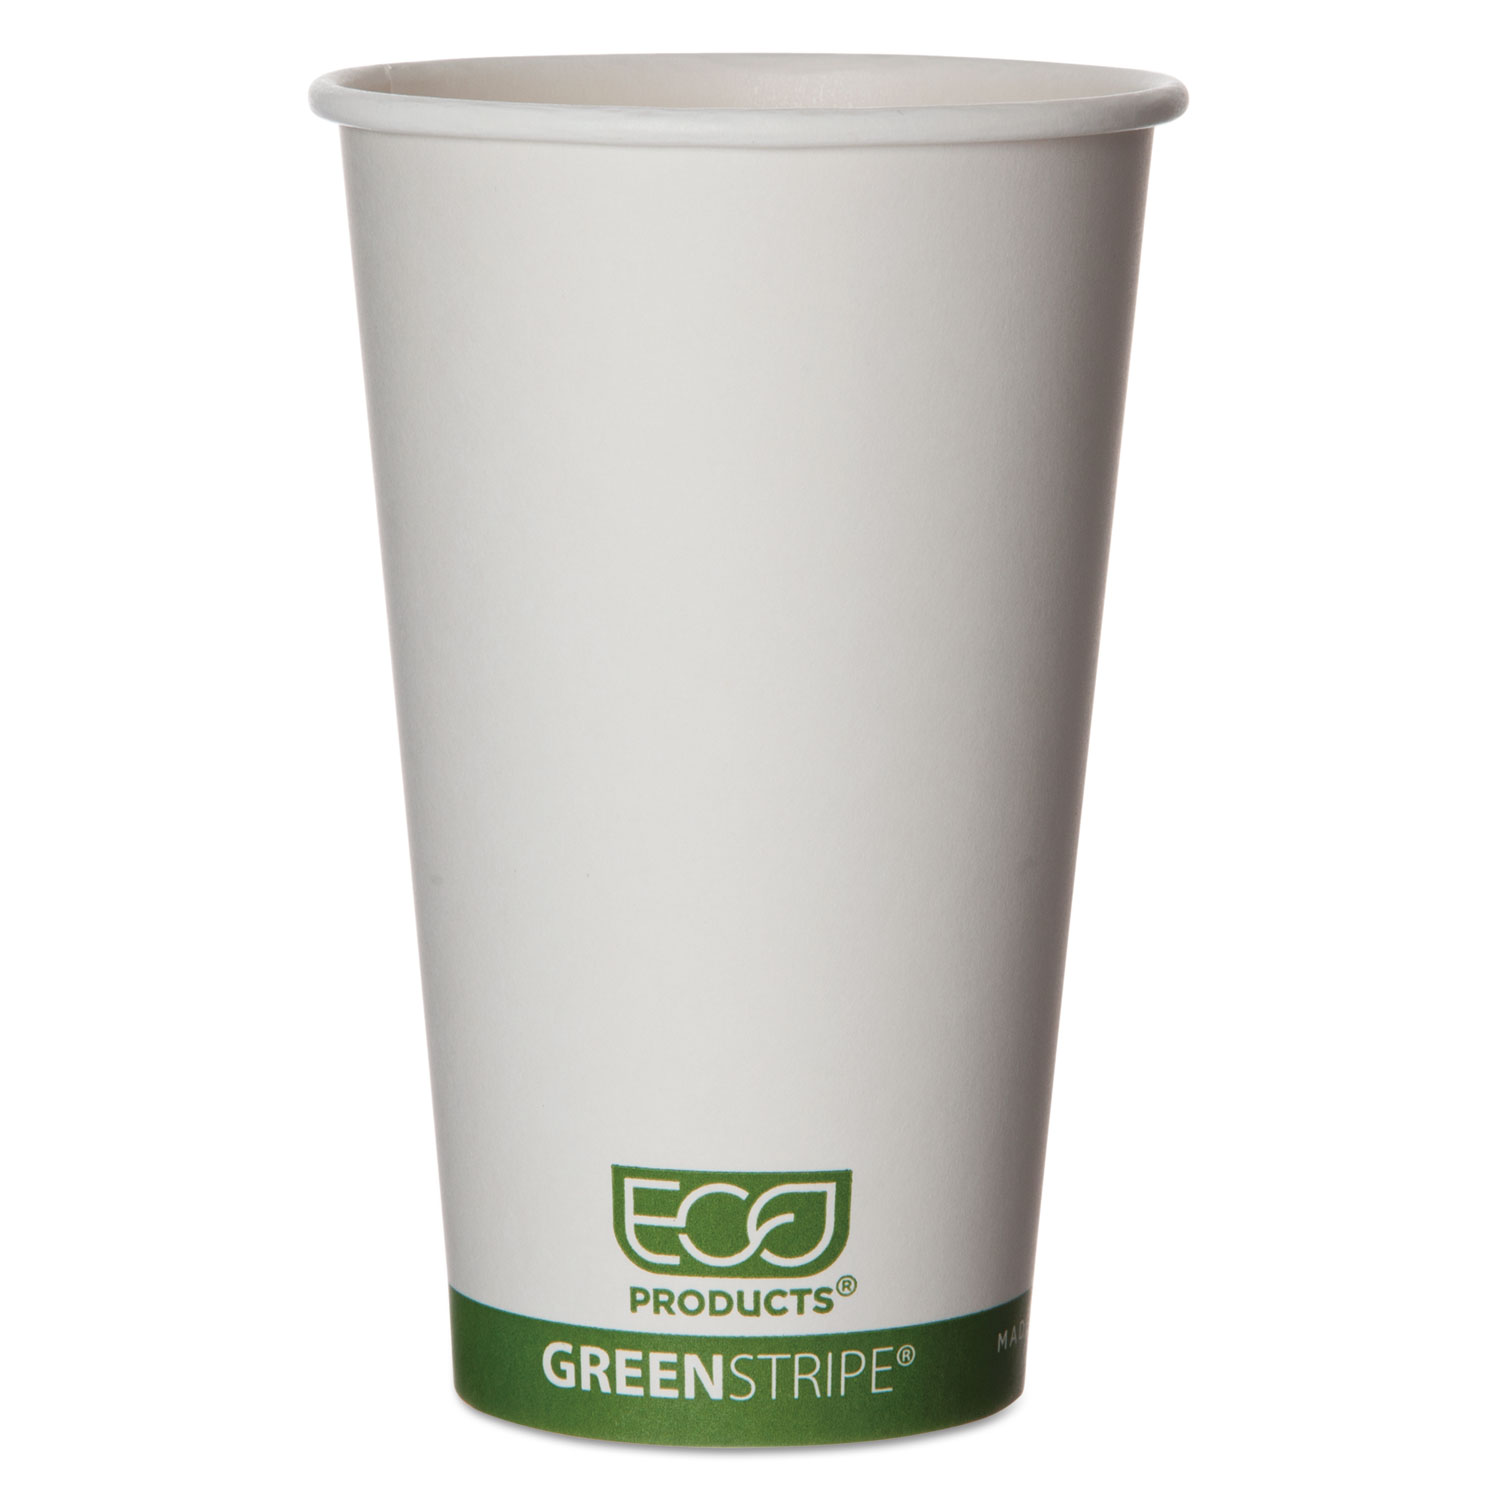  Eco-Products EP-BHC16-GS GreenStripe Renewable & Compostable Hot Cups - 16 oz., 50/PK, 20 PK/CT (ECOEPBHC16GS) 